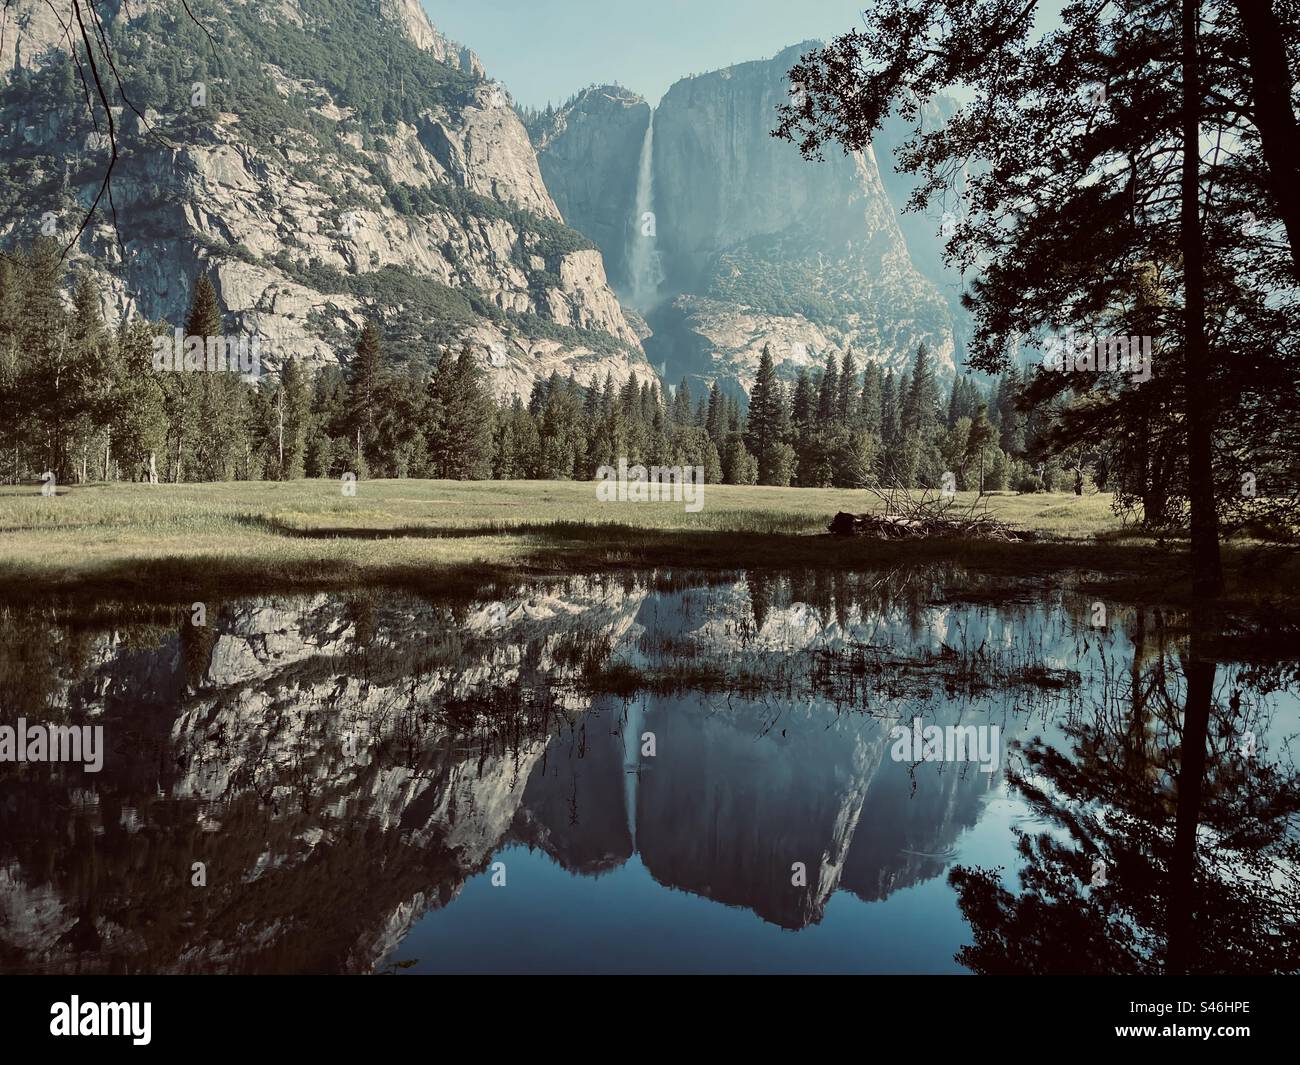 A very full flowing Yosemite Falls in July. 2023 was a record year for snow in California. Shot in July, 2023. Yosemite National Park, California USA b Stock Photo